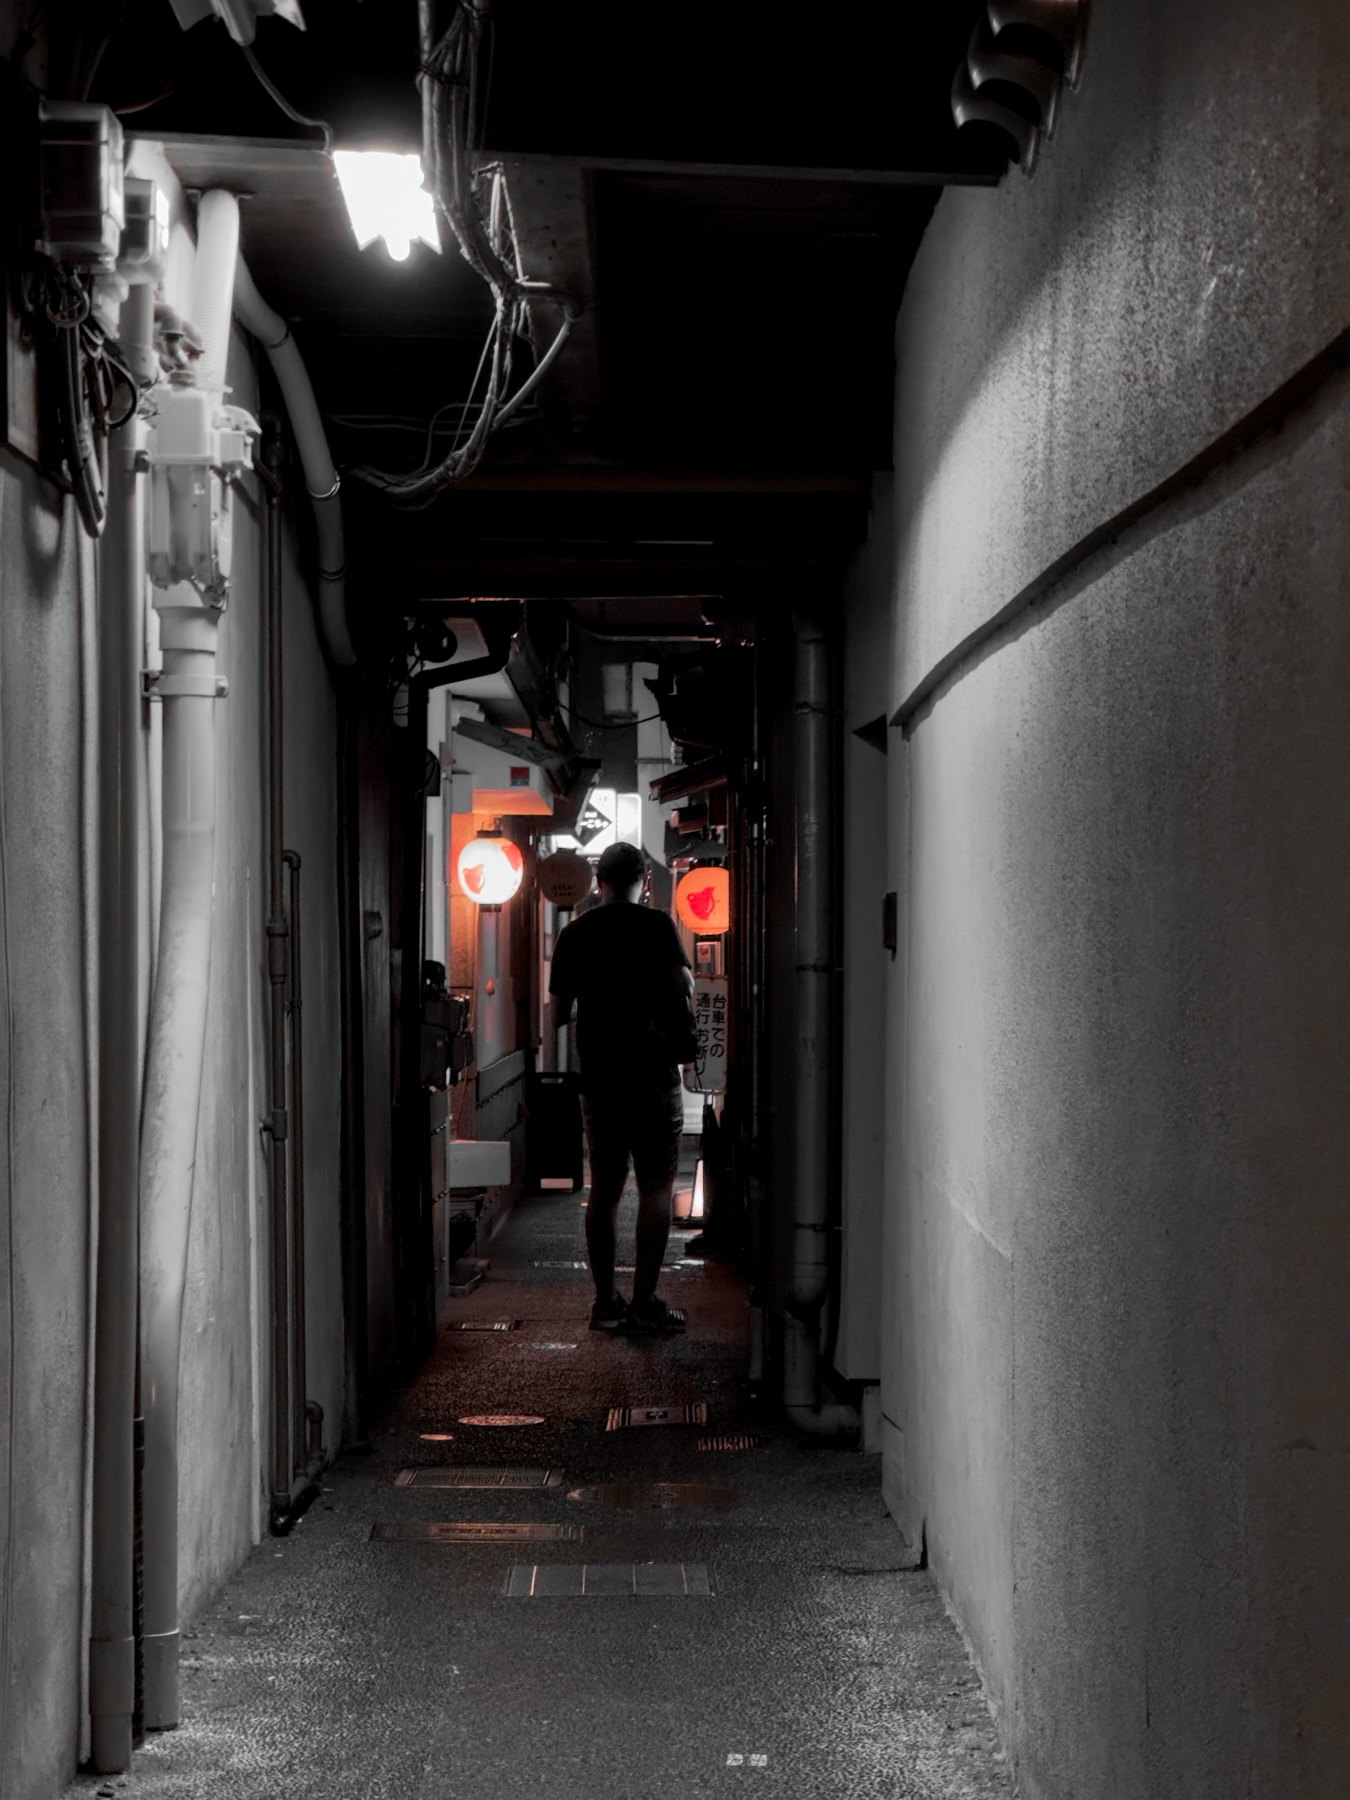 One of the dark chidori alleyways with a silhouetted man at the end